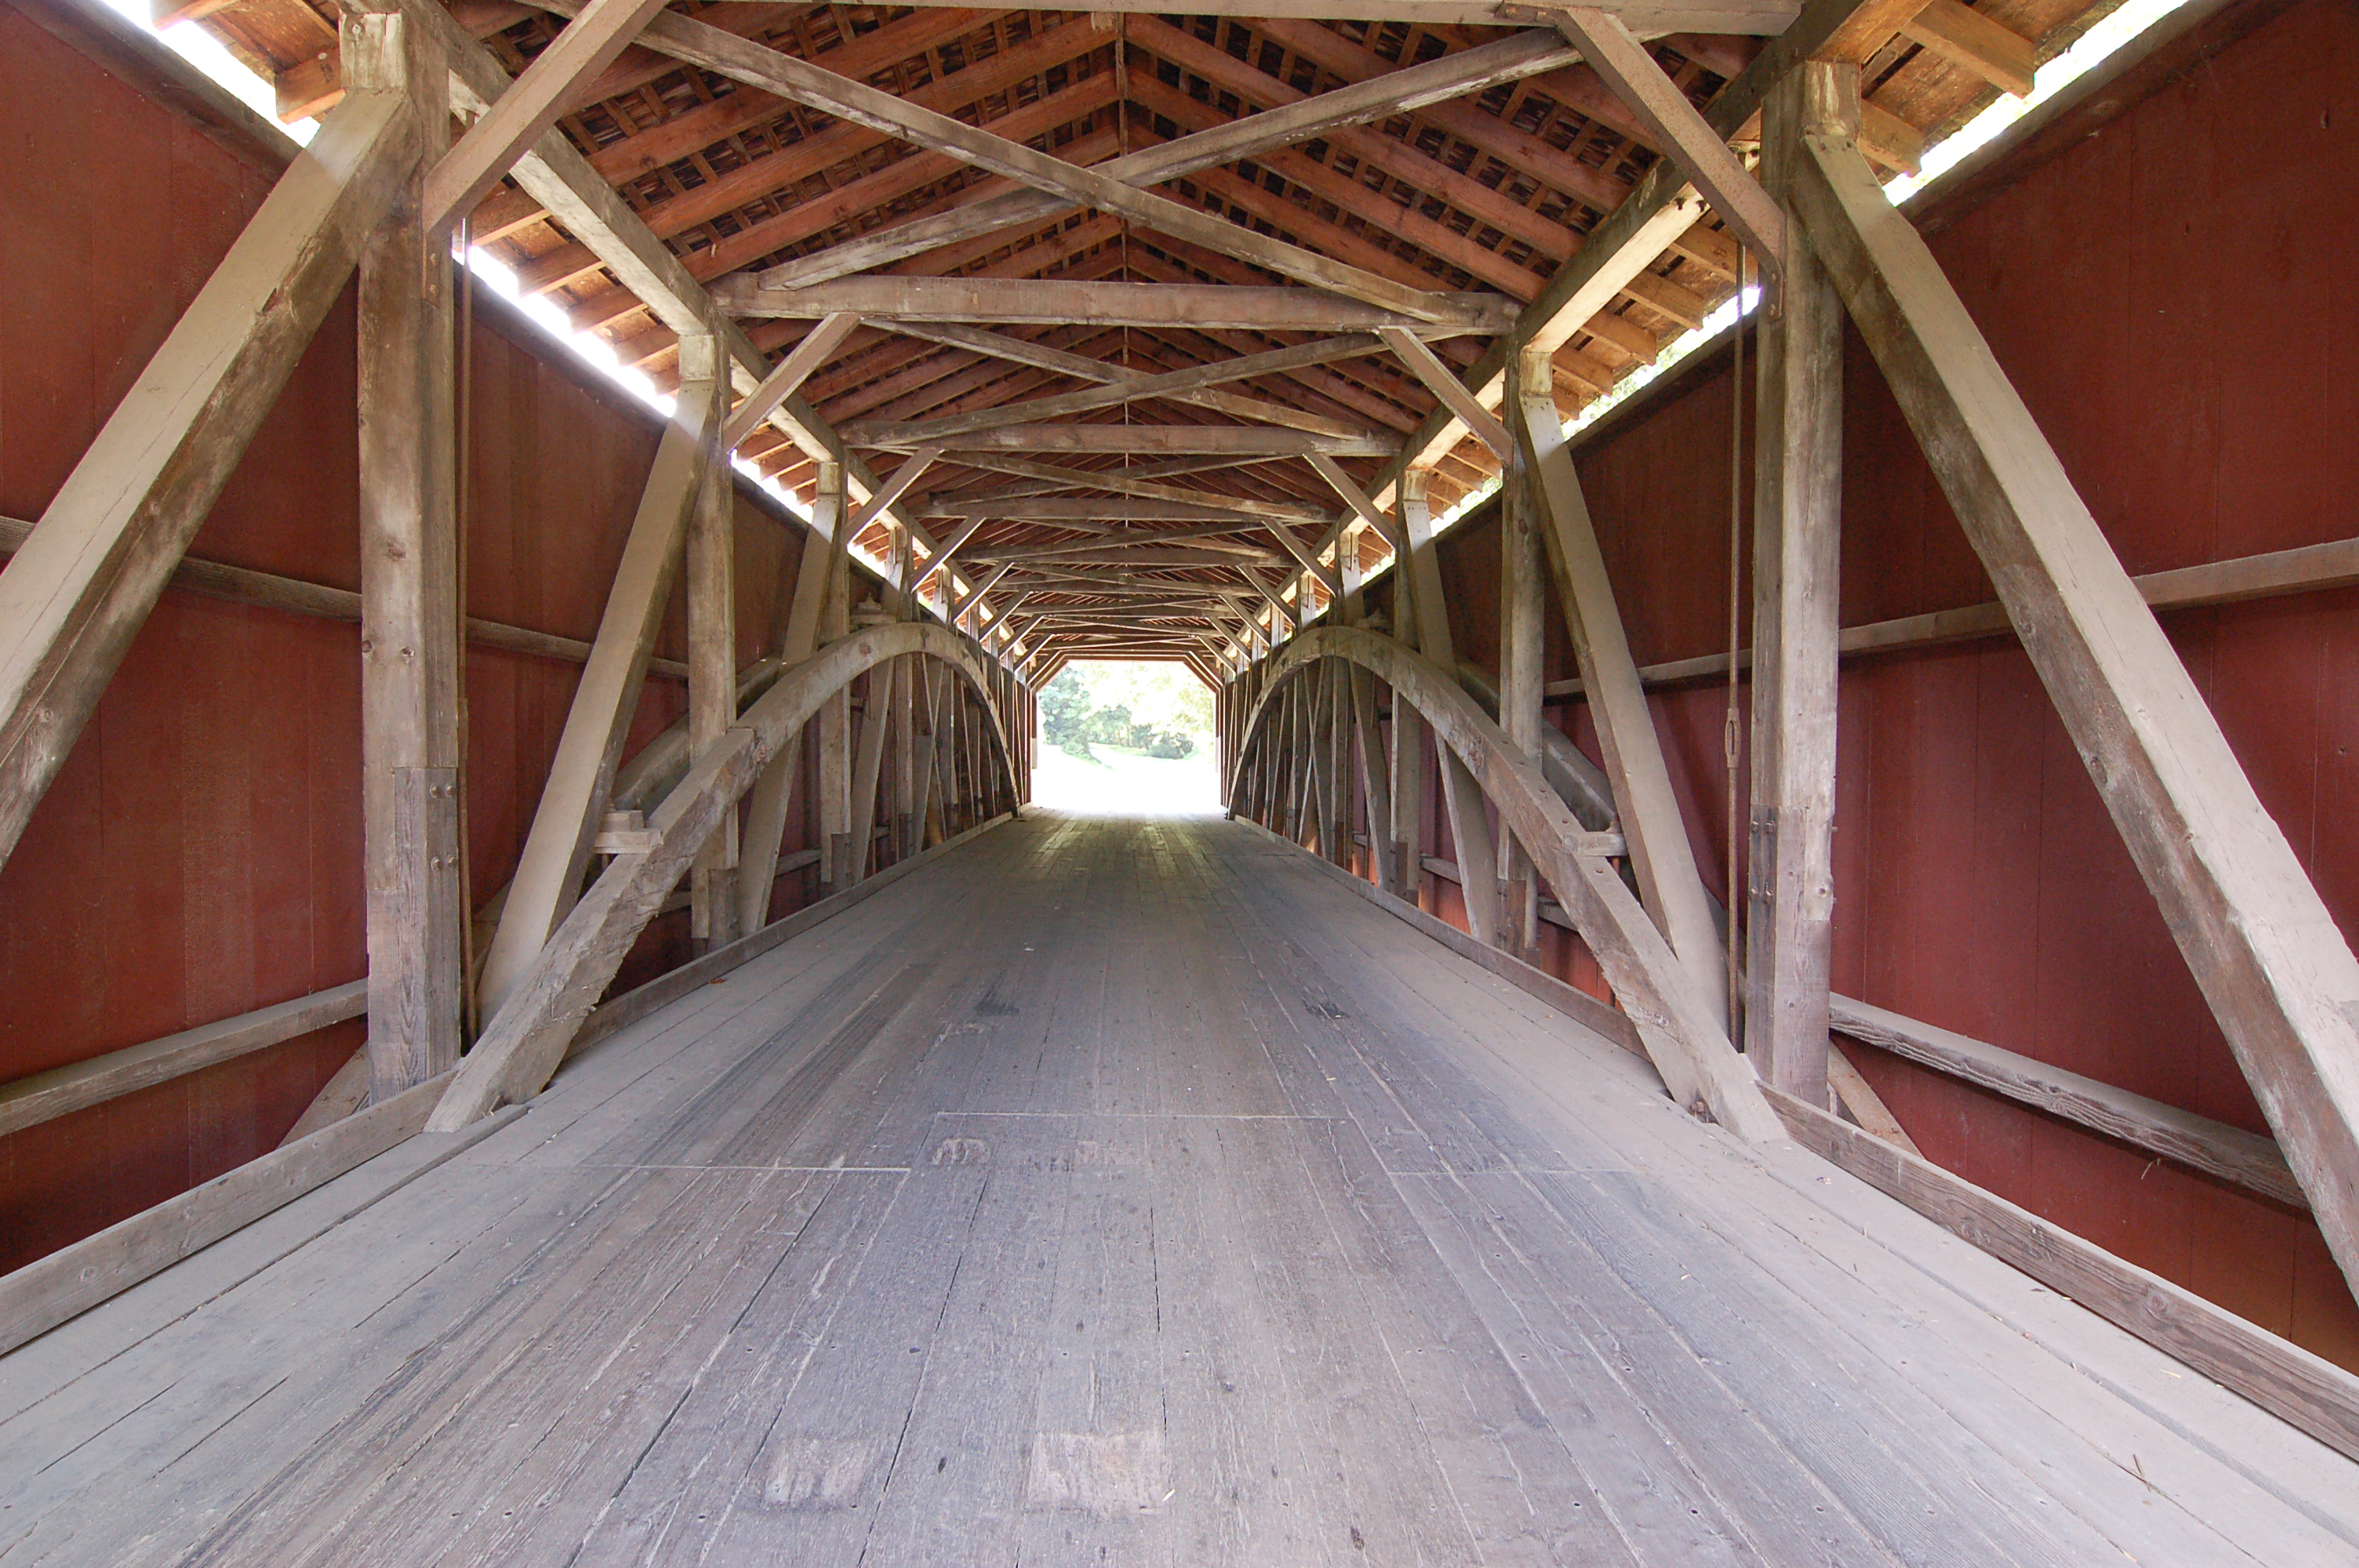 Amazing Covered Bridge Pictures & Backgrounds